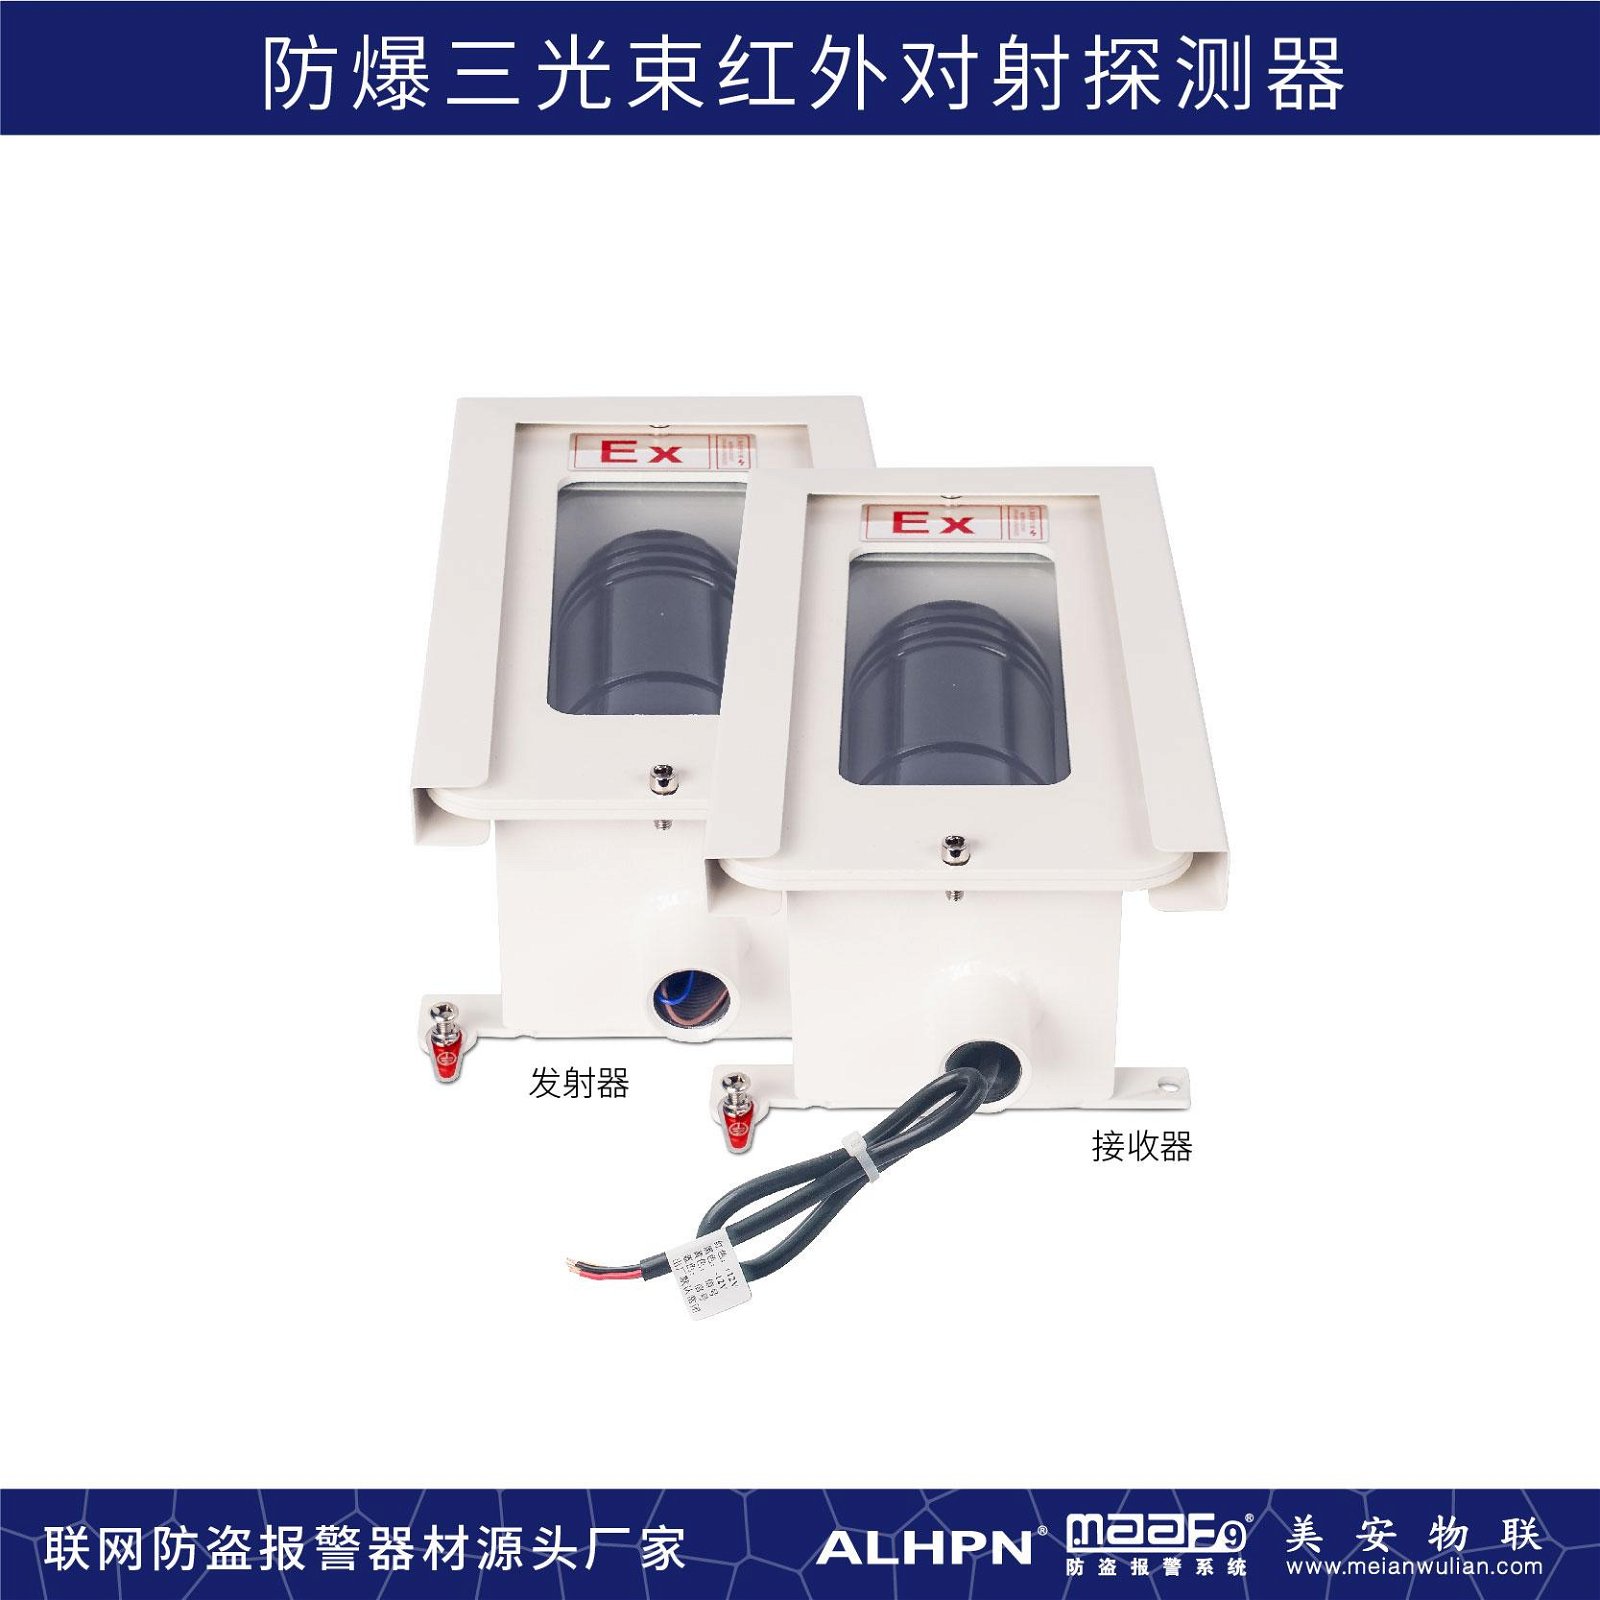 Explosion-proof infrared detector ABE 2